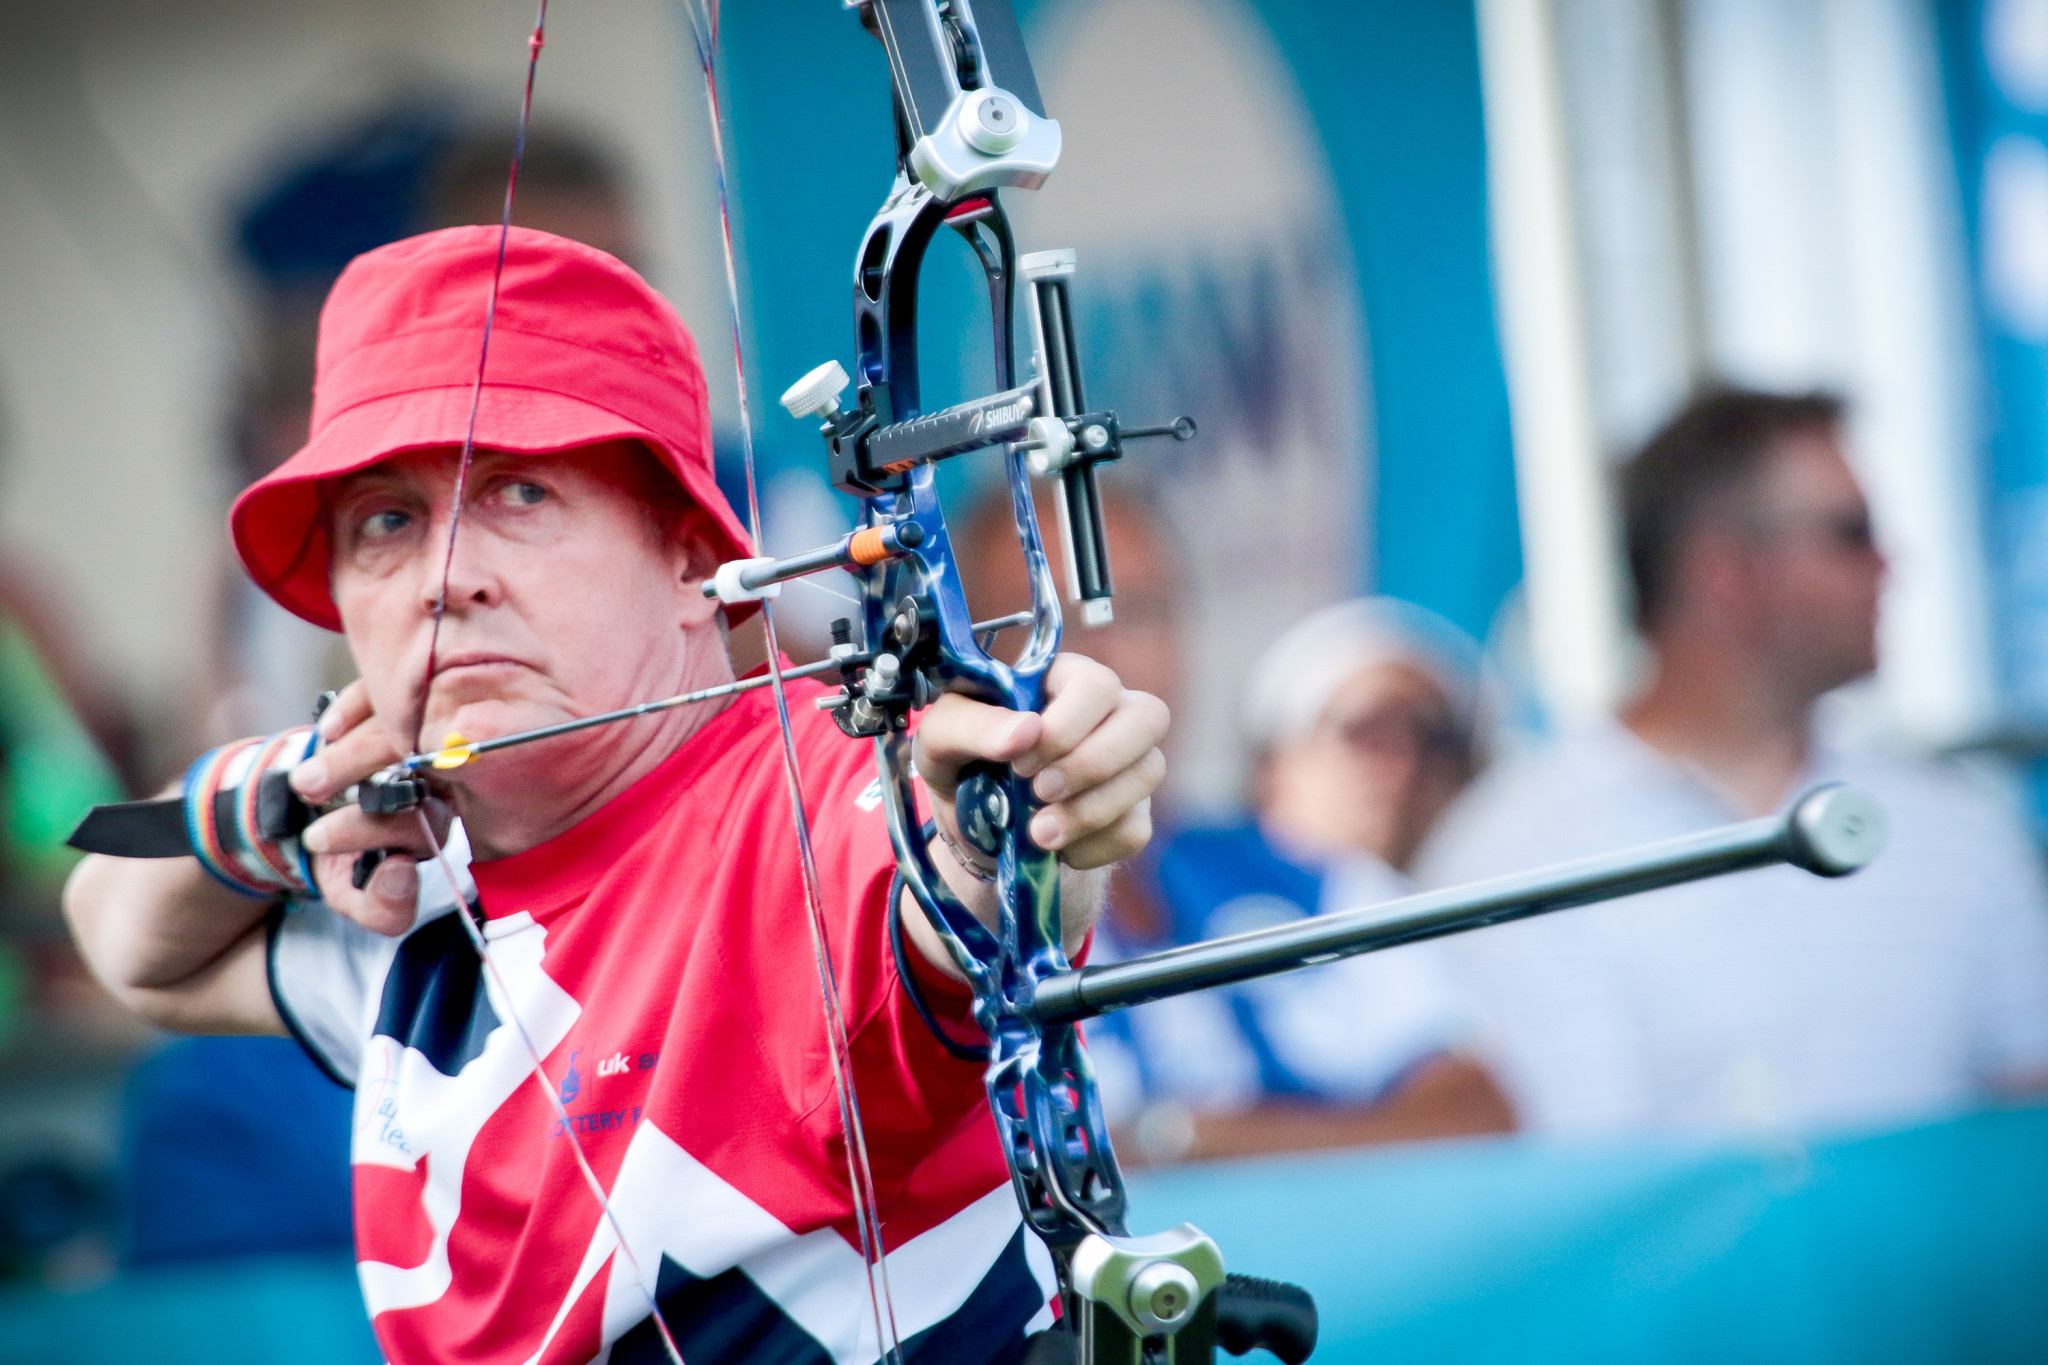 Five-time Paralympic archer Cavanagh retires due to ongoing injury